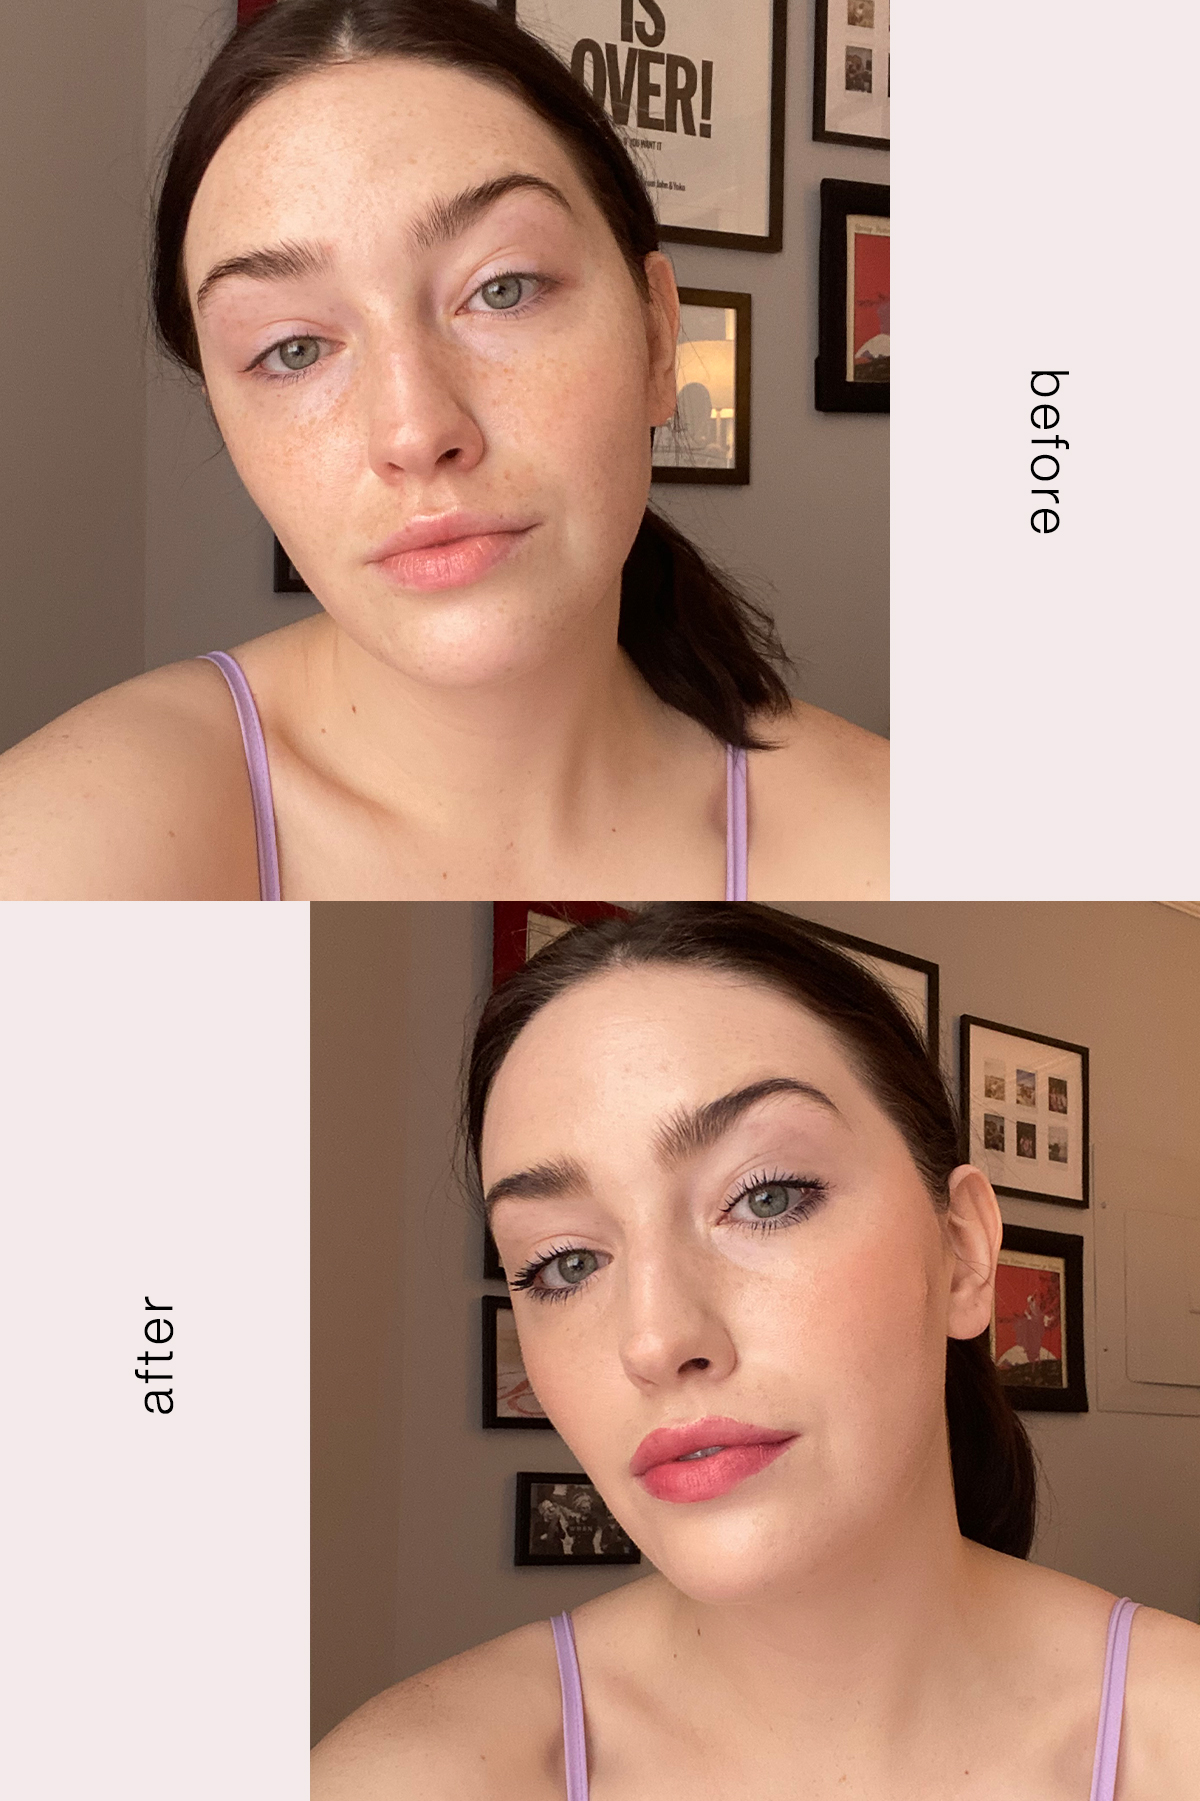 FashStyleLiv: Makeup Forever HD Foundation Review